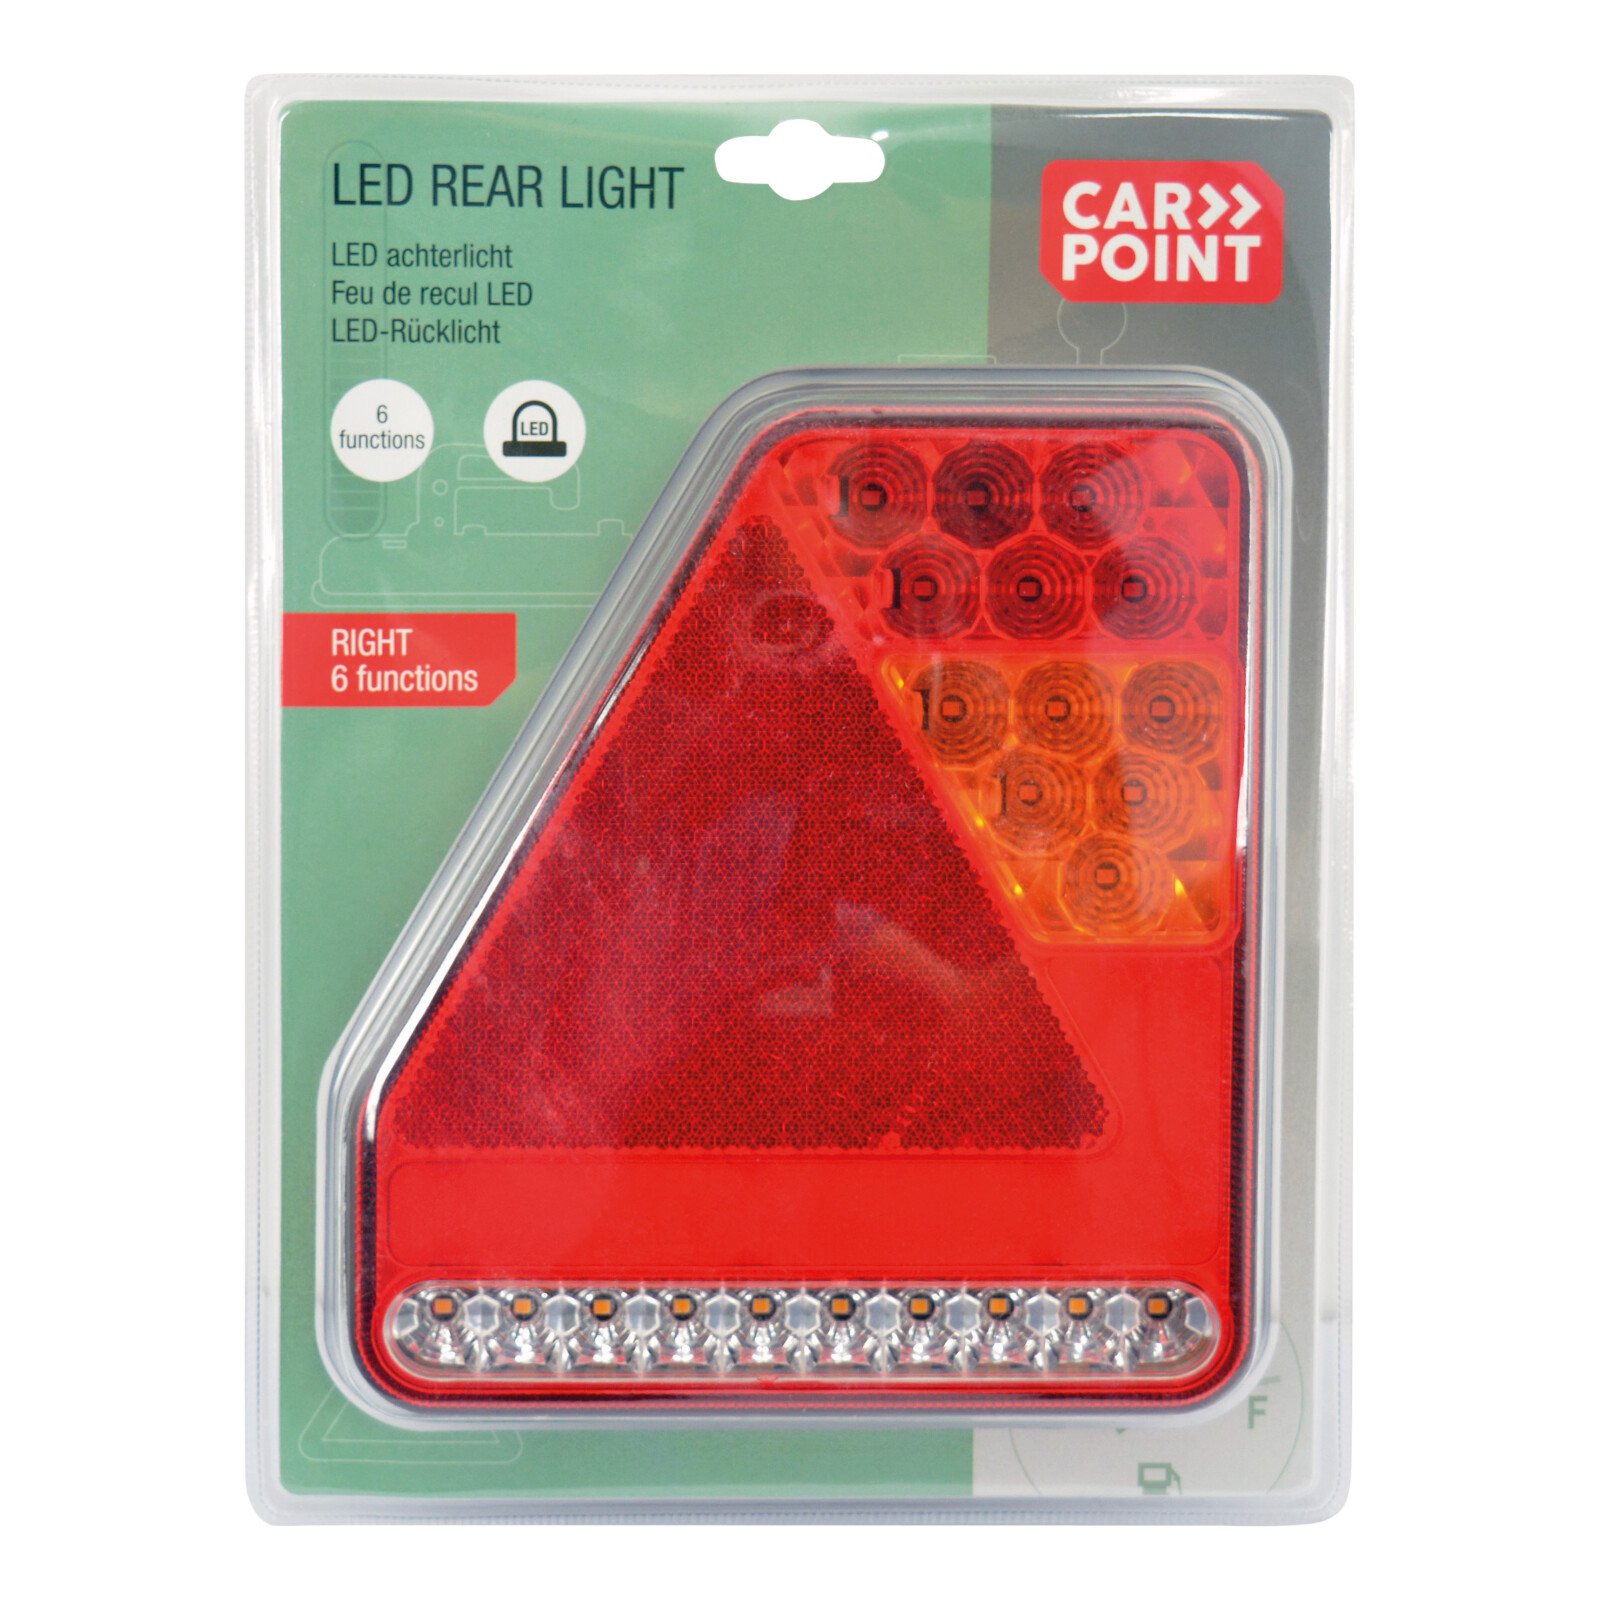 LED rear light 6funtions 185x210mm Carpoint - Right thumb